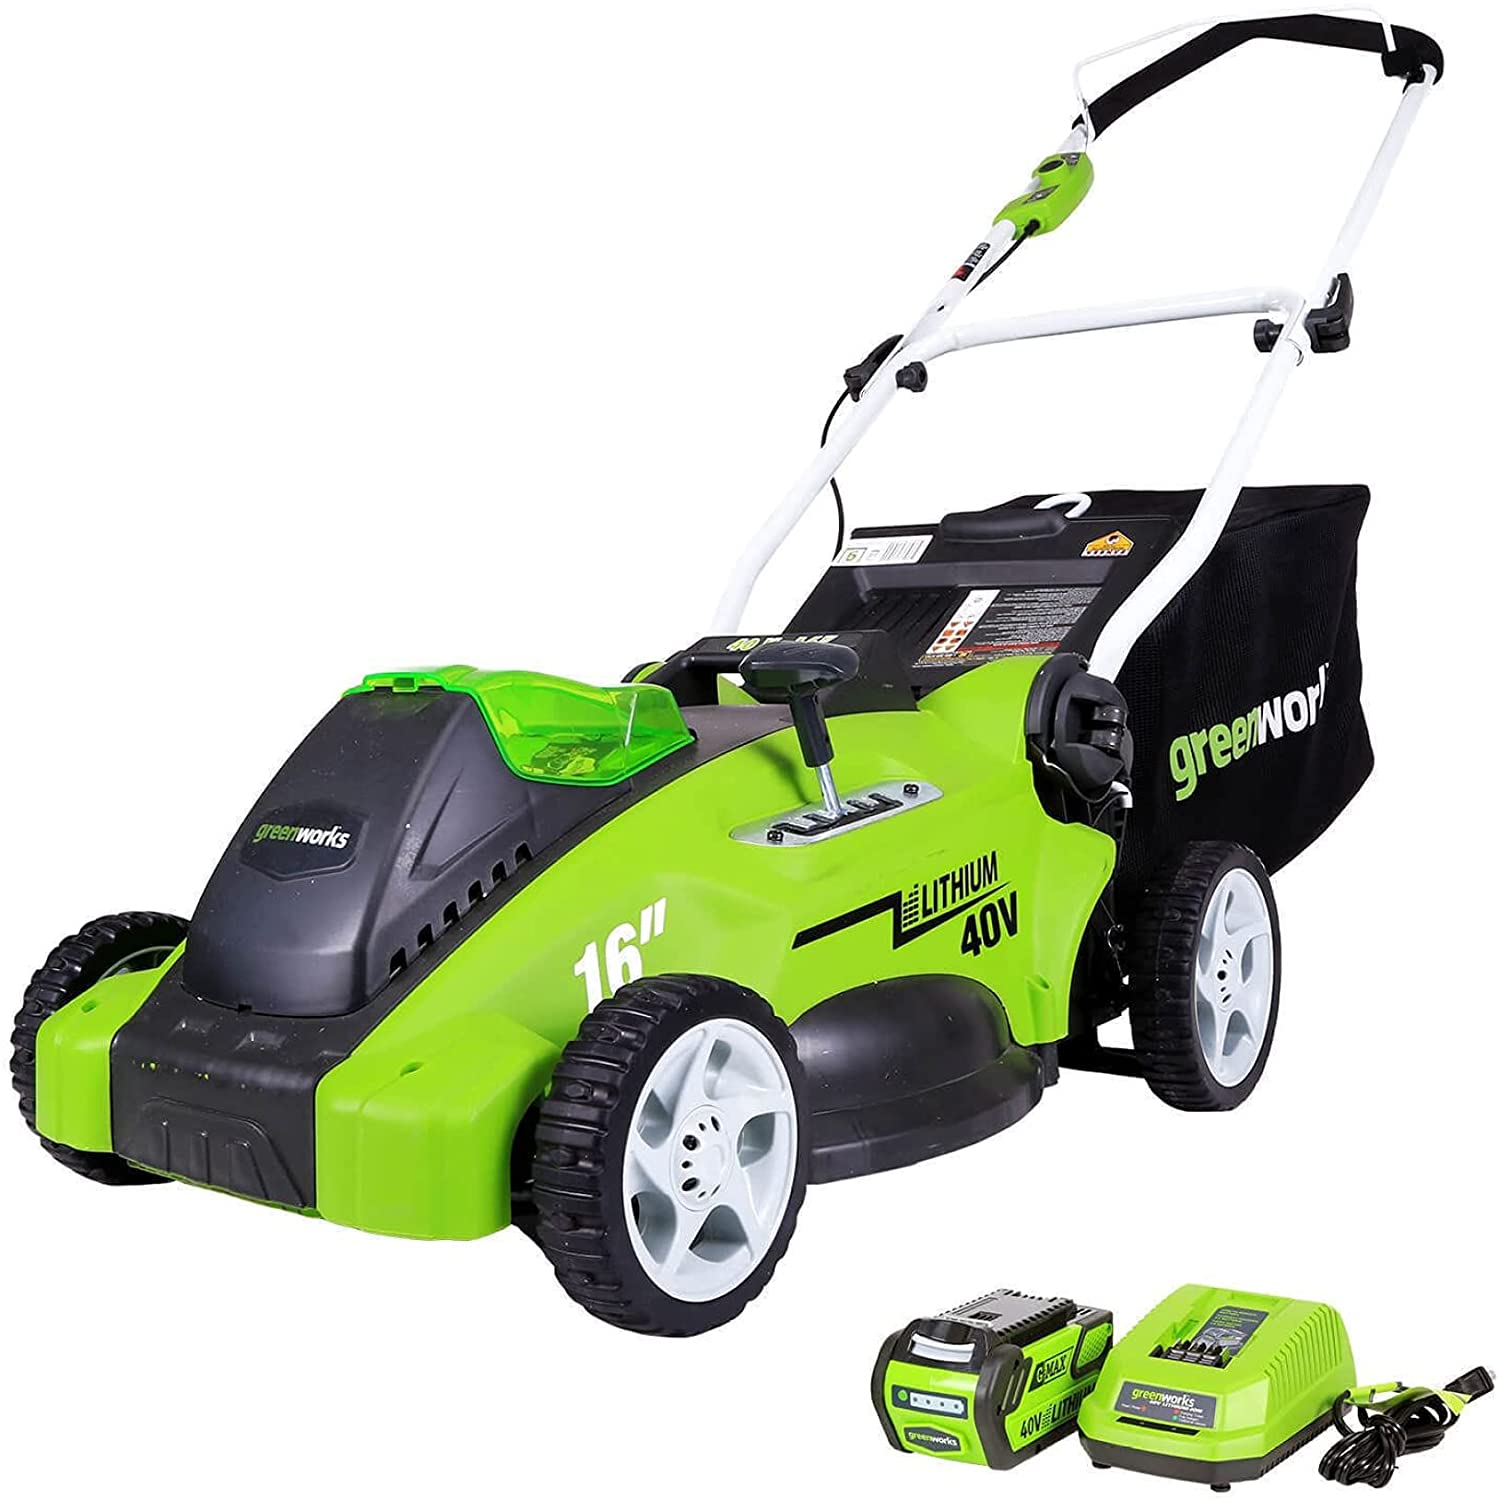 Greenworks G-Max 16" 40V Li-Ion Cordless Lawn Mower w/ Battery & Charger $189 + Free Shipping